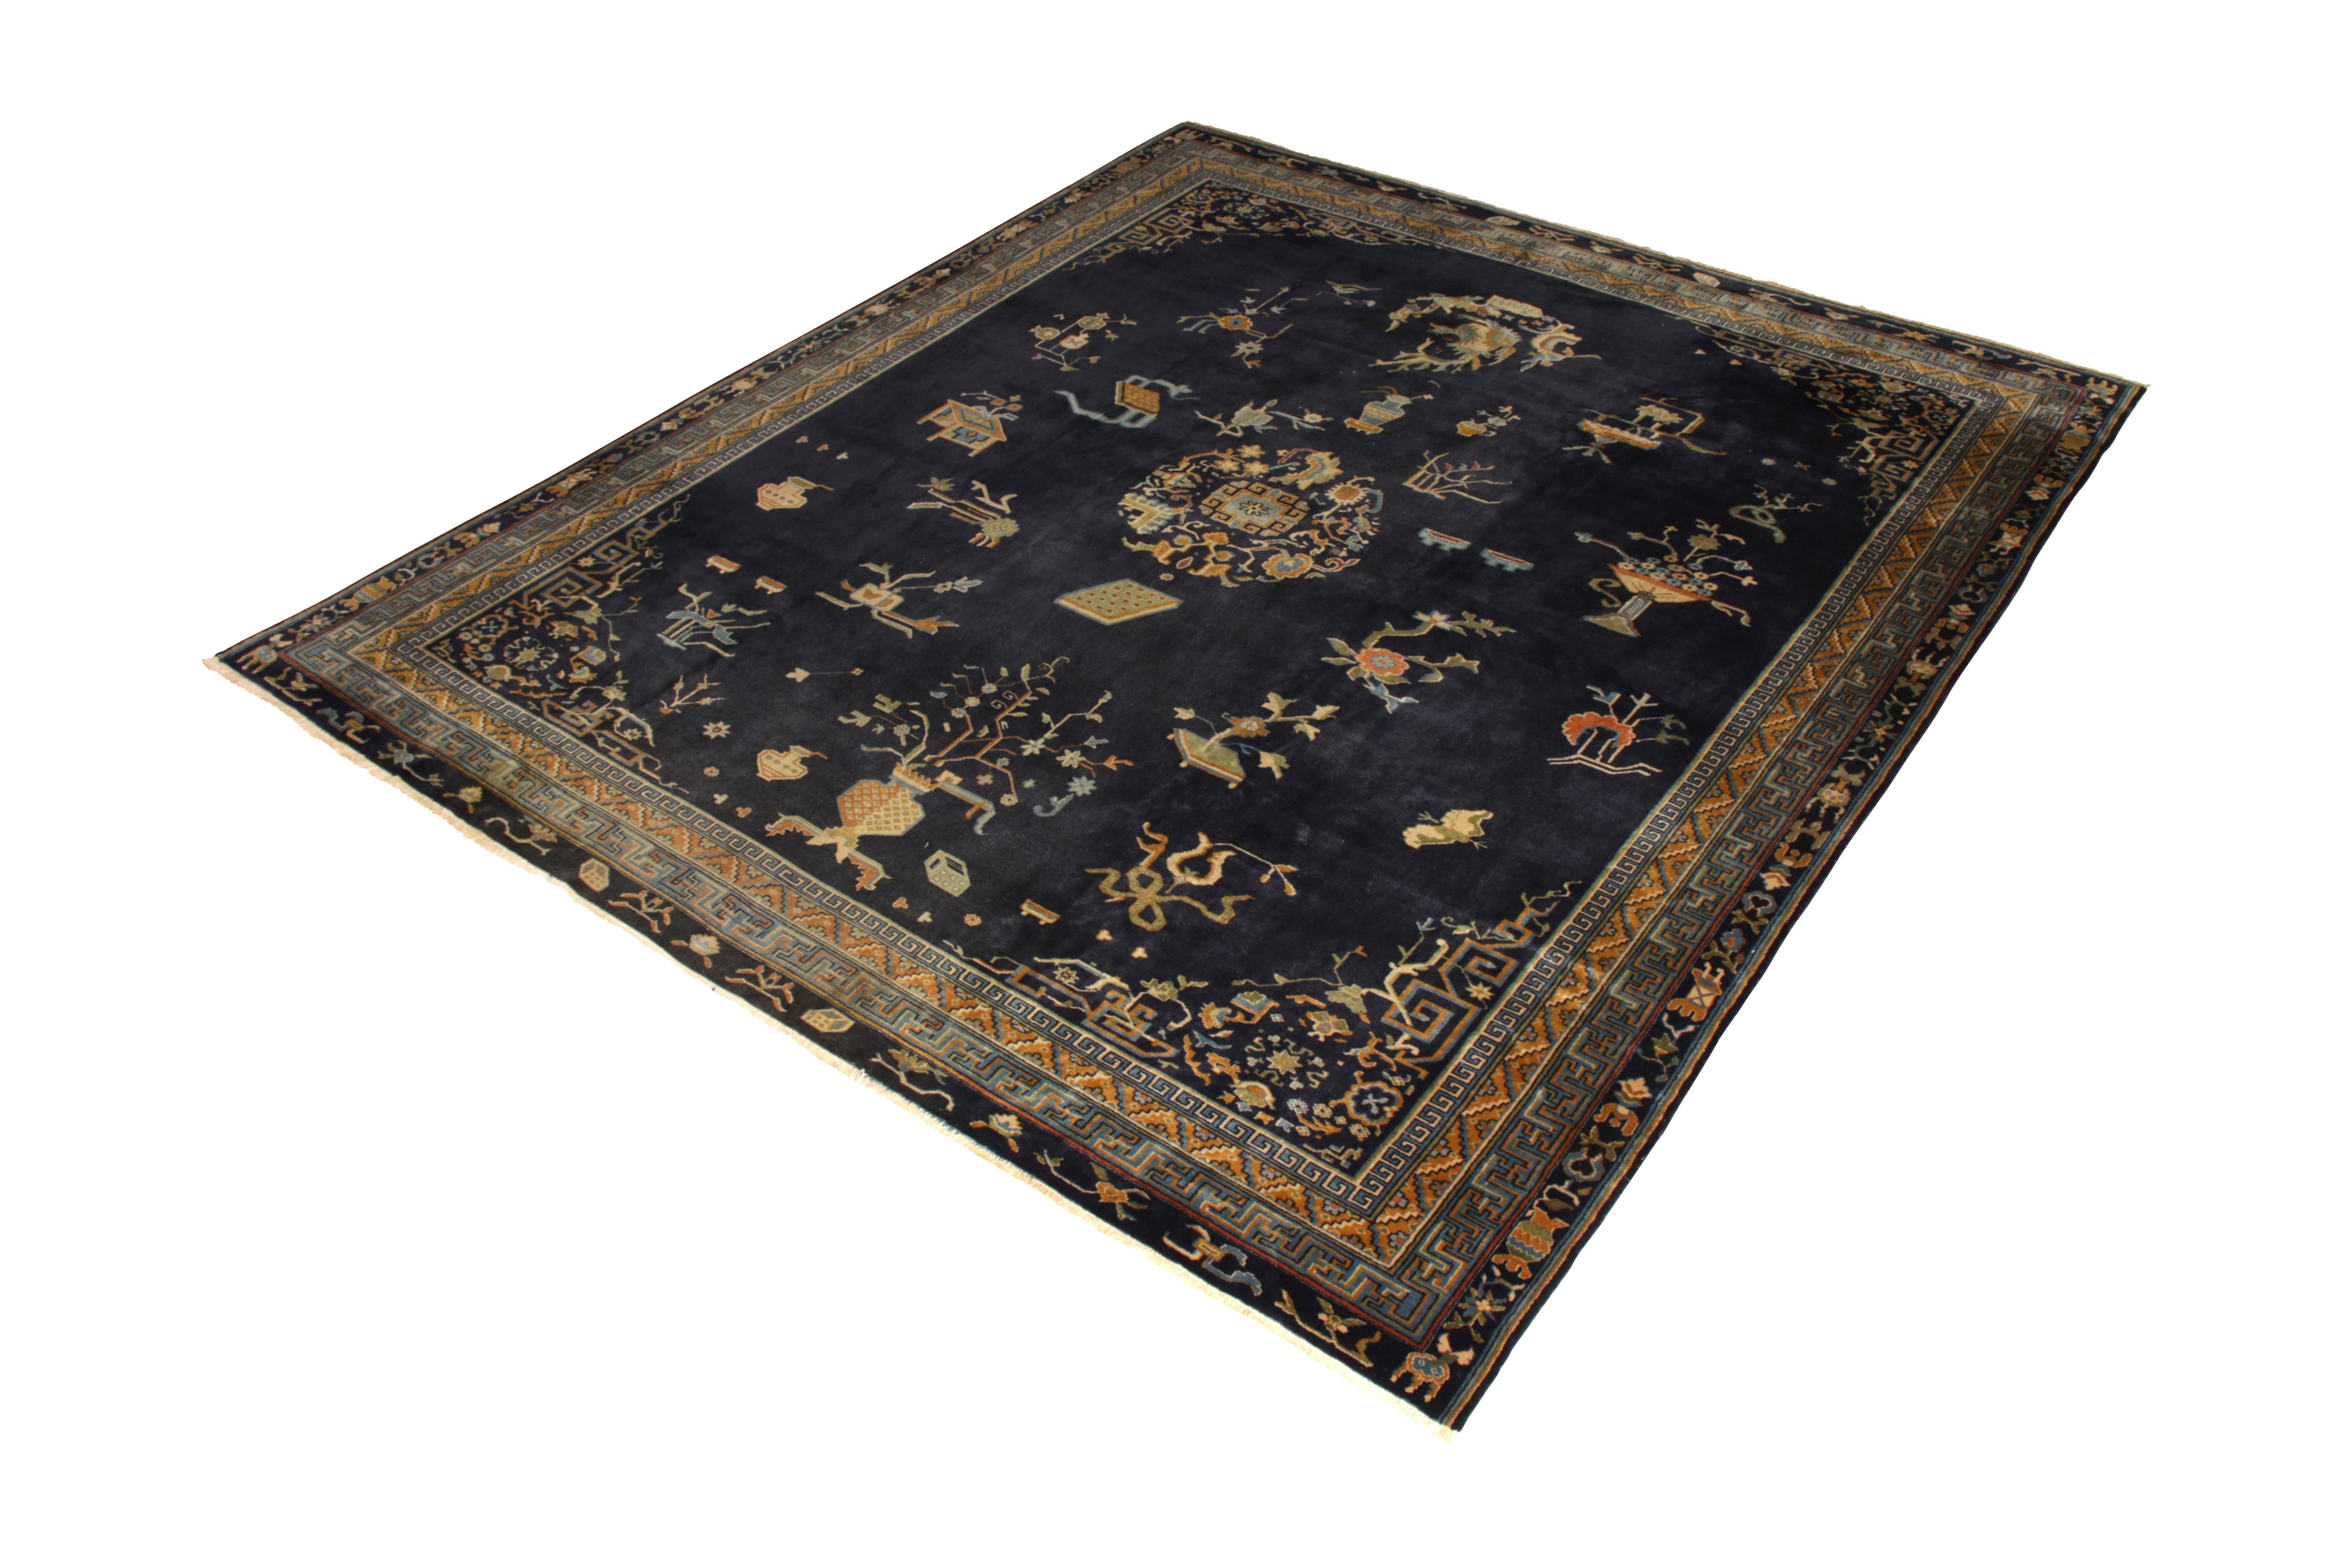 Hand knotted in wool originating from India circa 1920, this antique art deco rug connotes a Samarkand rug design, inspired by neighboring Peking rugs with a unique colloquial take. A regal play of navy blue and gold hues both inspires a classic